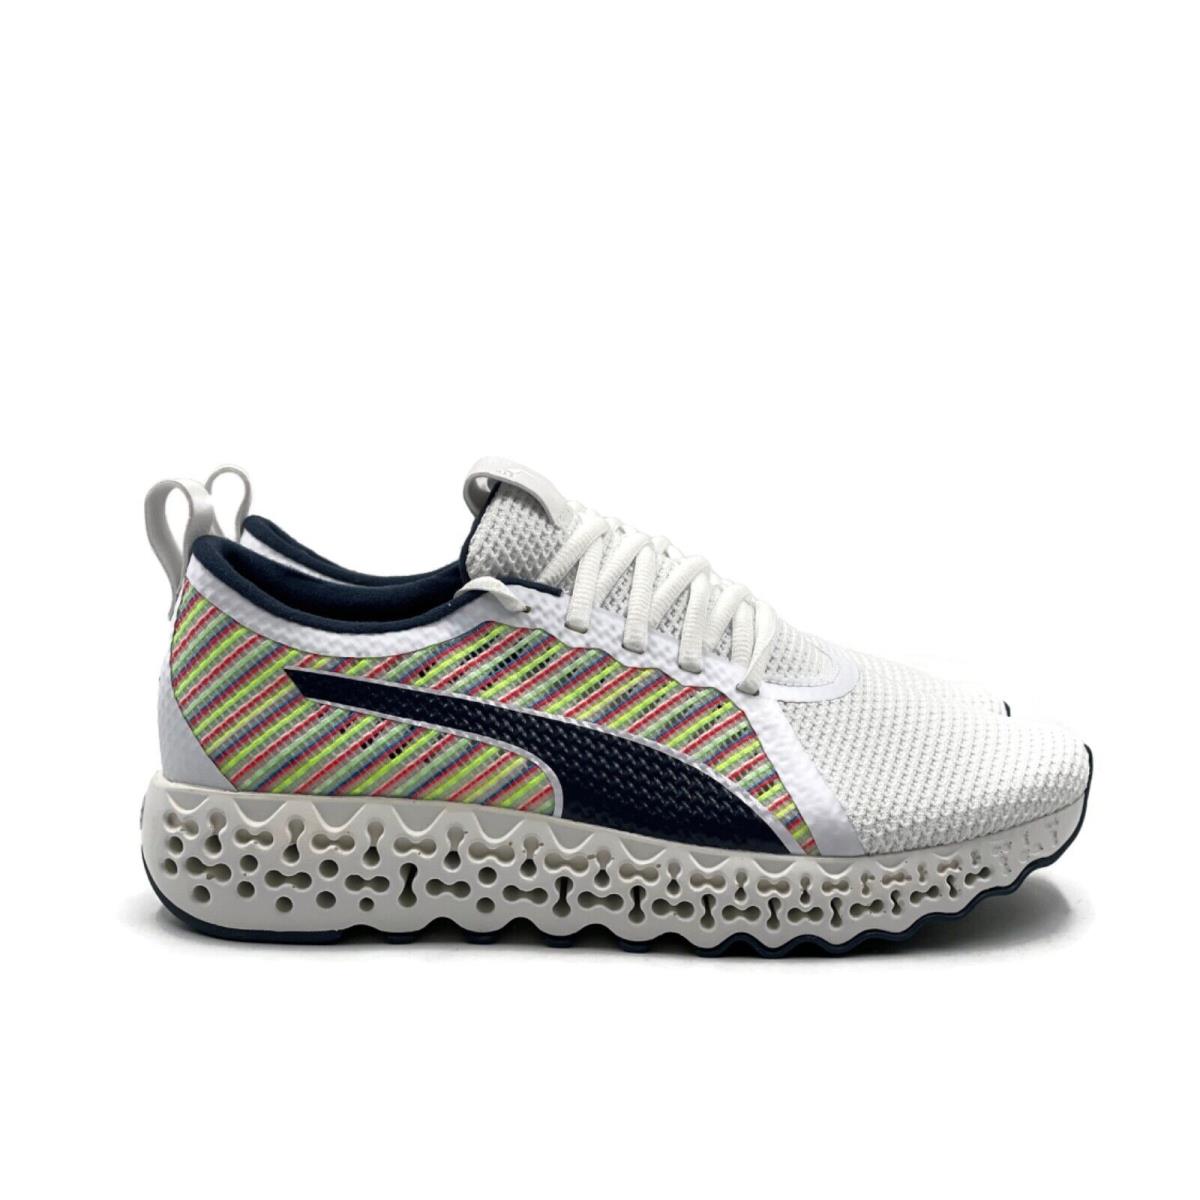 Puma Calibrate Runner SP Mens Casual Running Shoe White Athletic Trainer Sneaker - White Multicolor